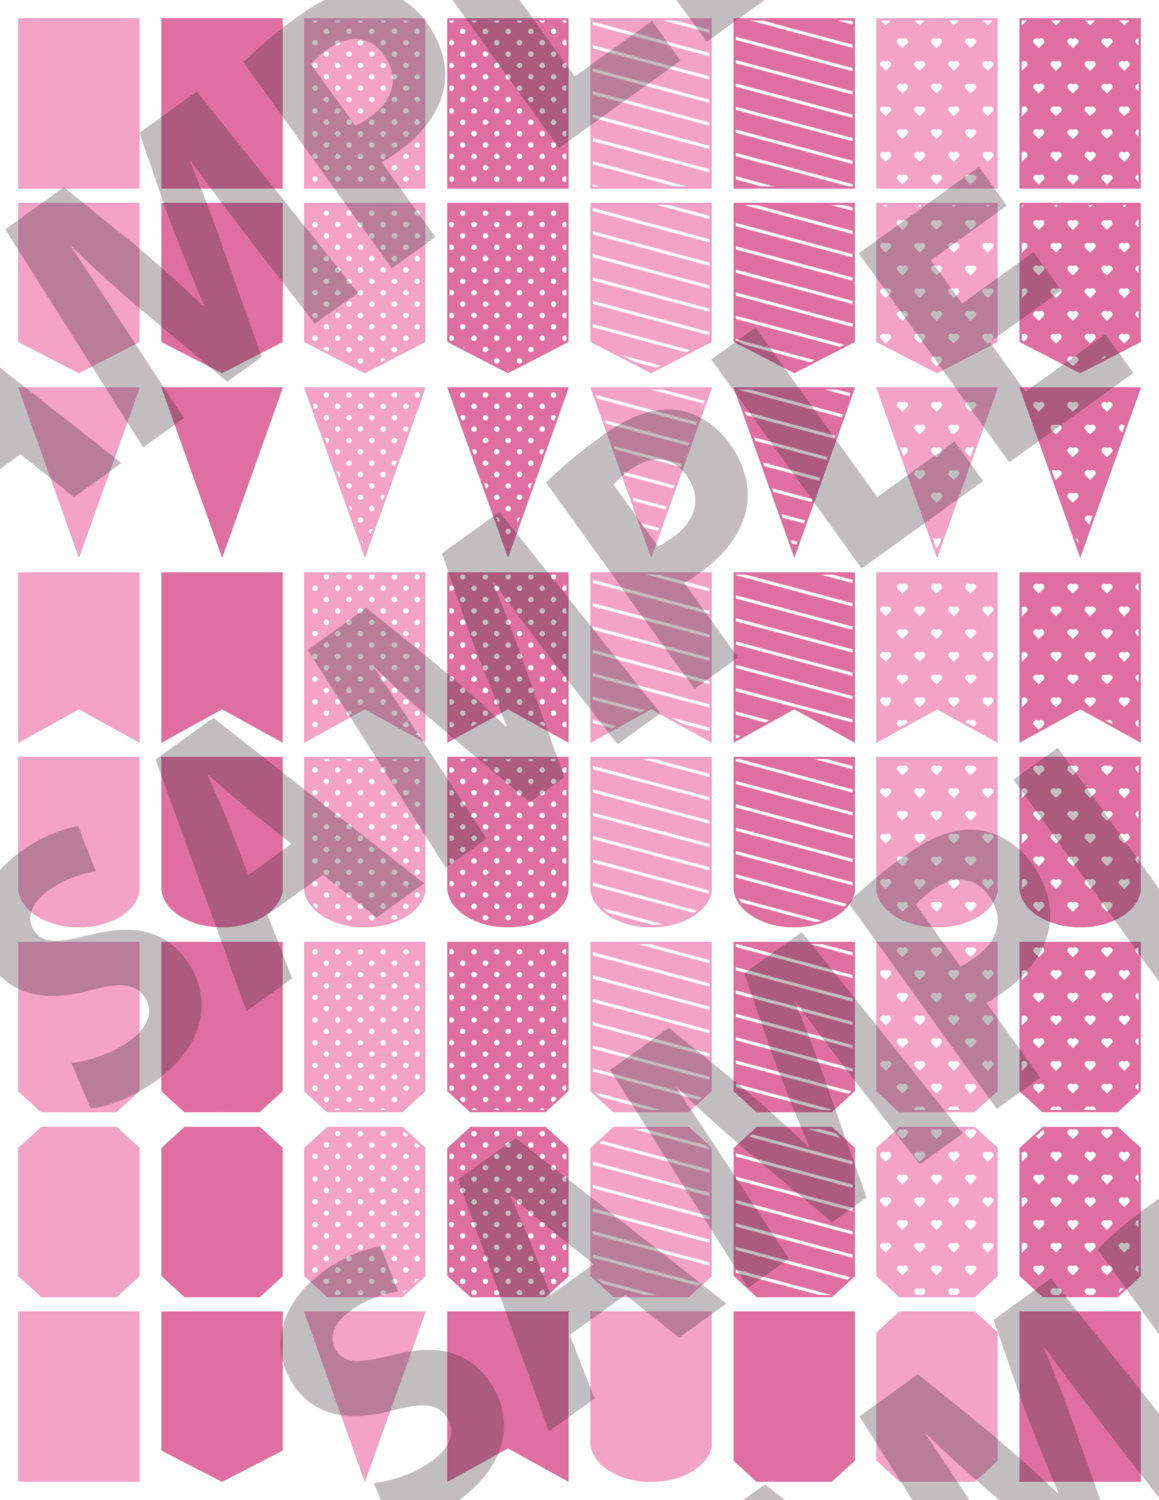 Pink 1 - Small Banners